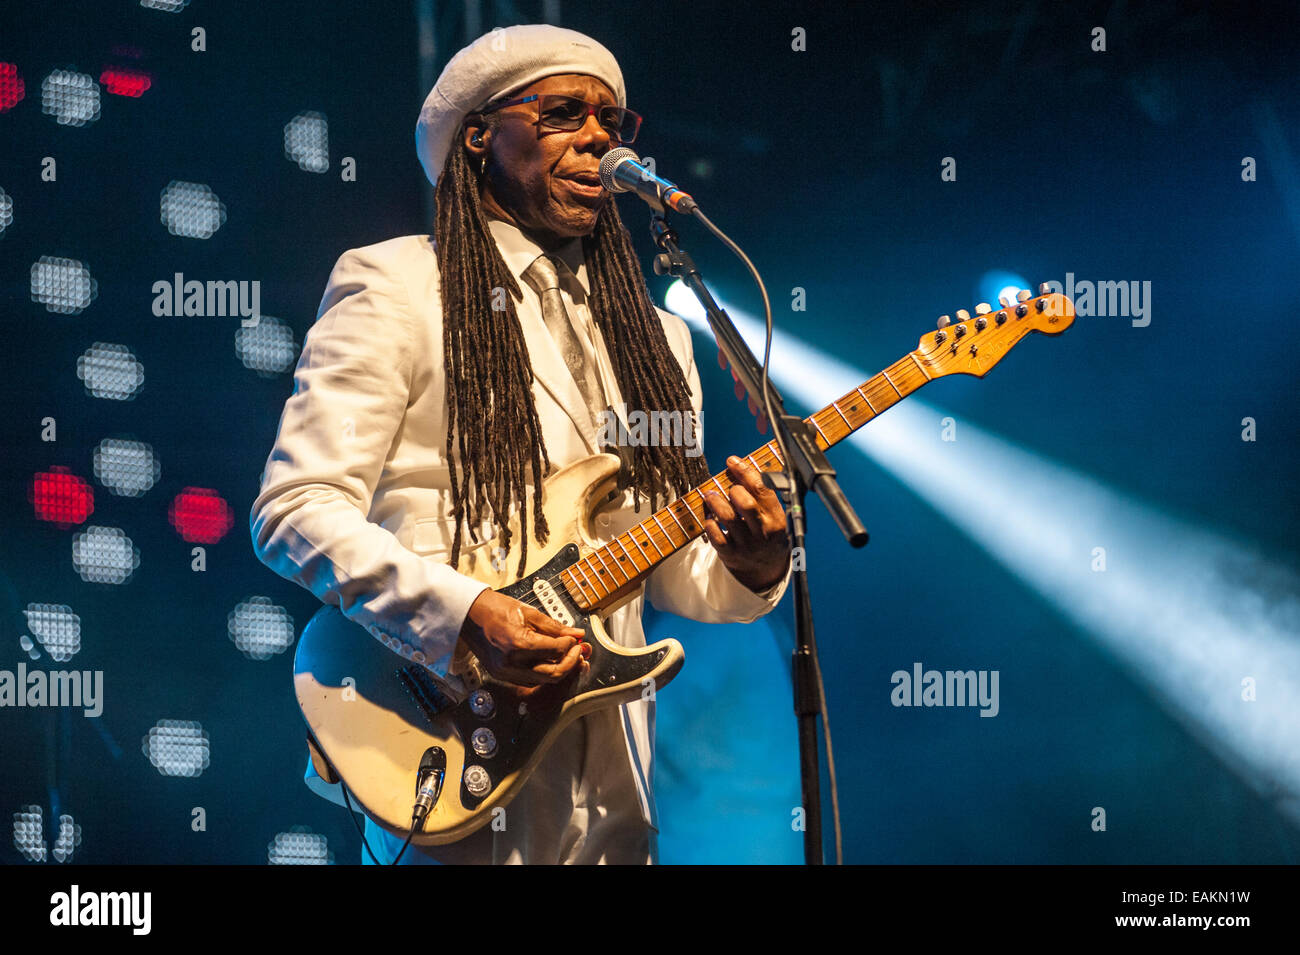 CHIC featuring singer songwriter guitarist Nile Rodgers at a live concert at Unknown festival in Rovinj, Croatia, 2014. Stock Photo